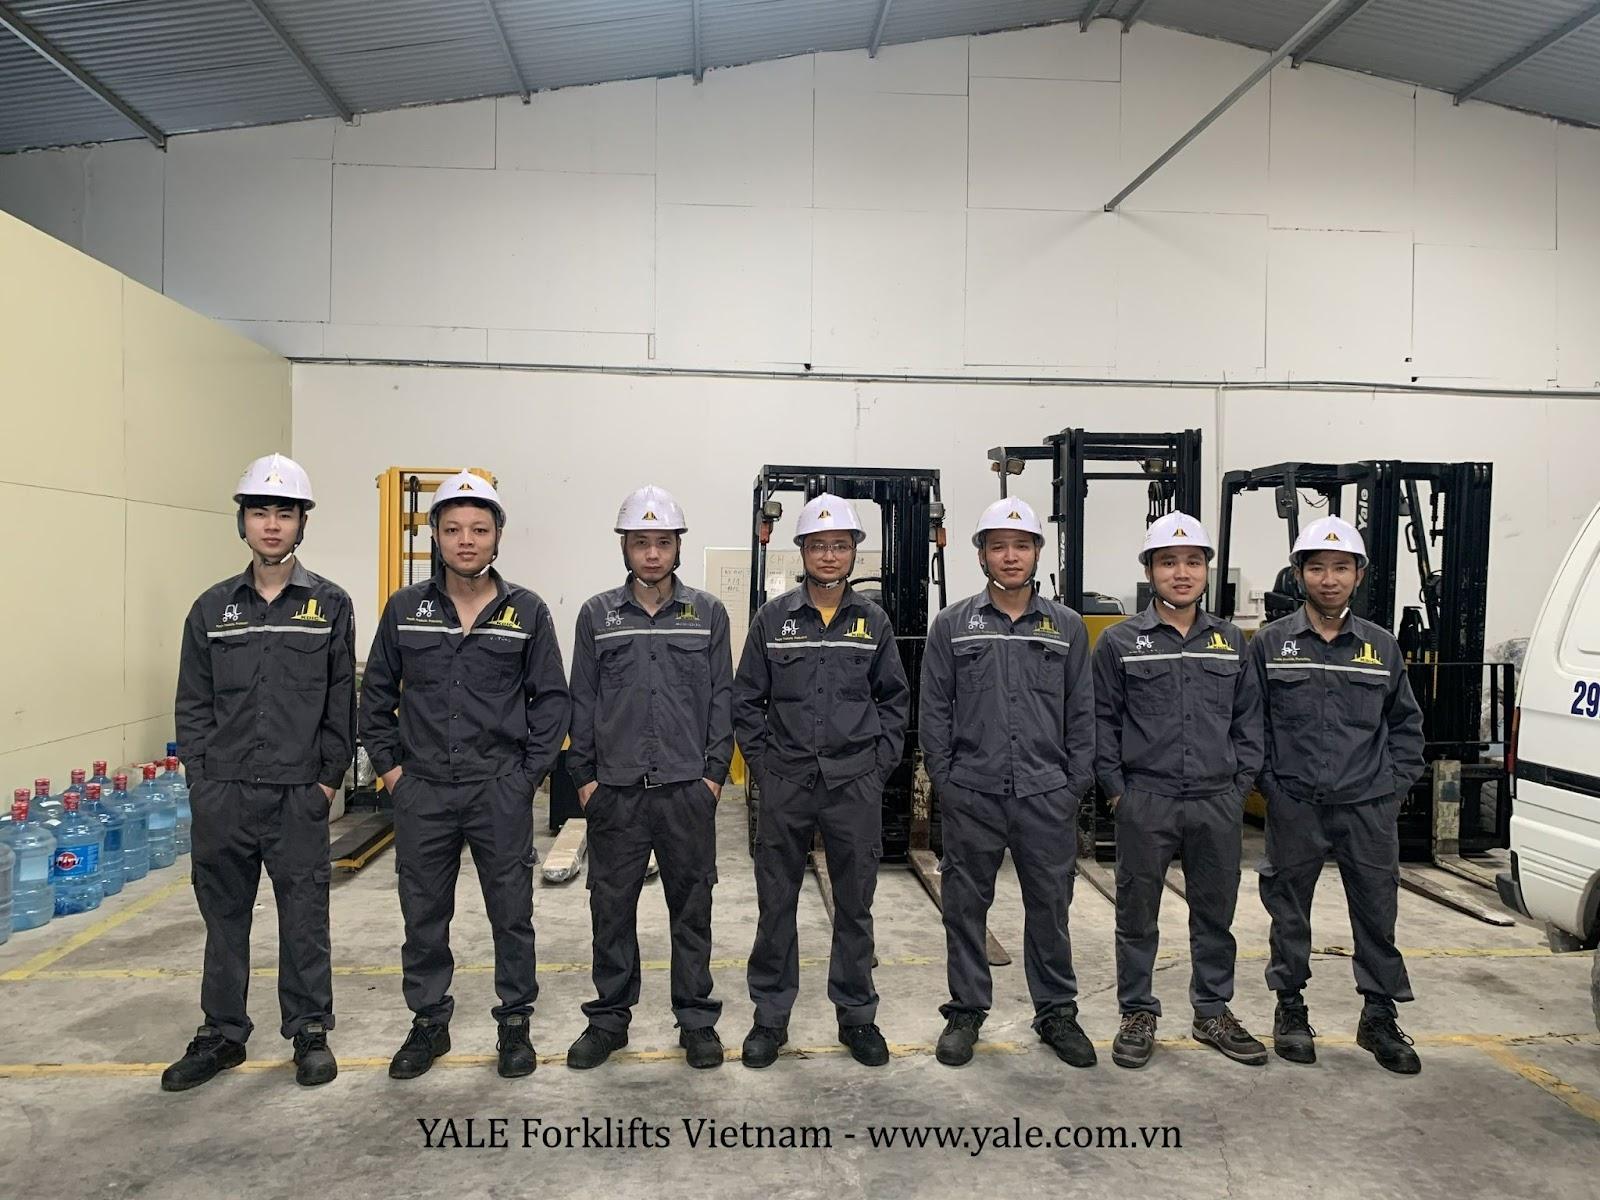 The experienced technical team of Yale Forklifts Vietnam